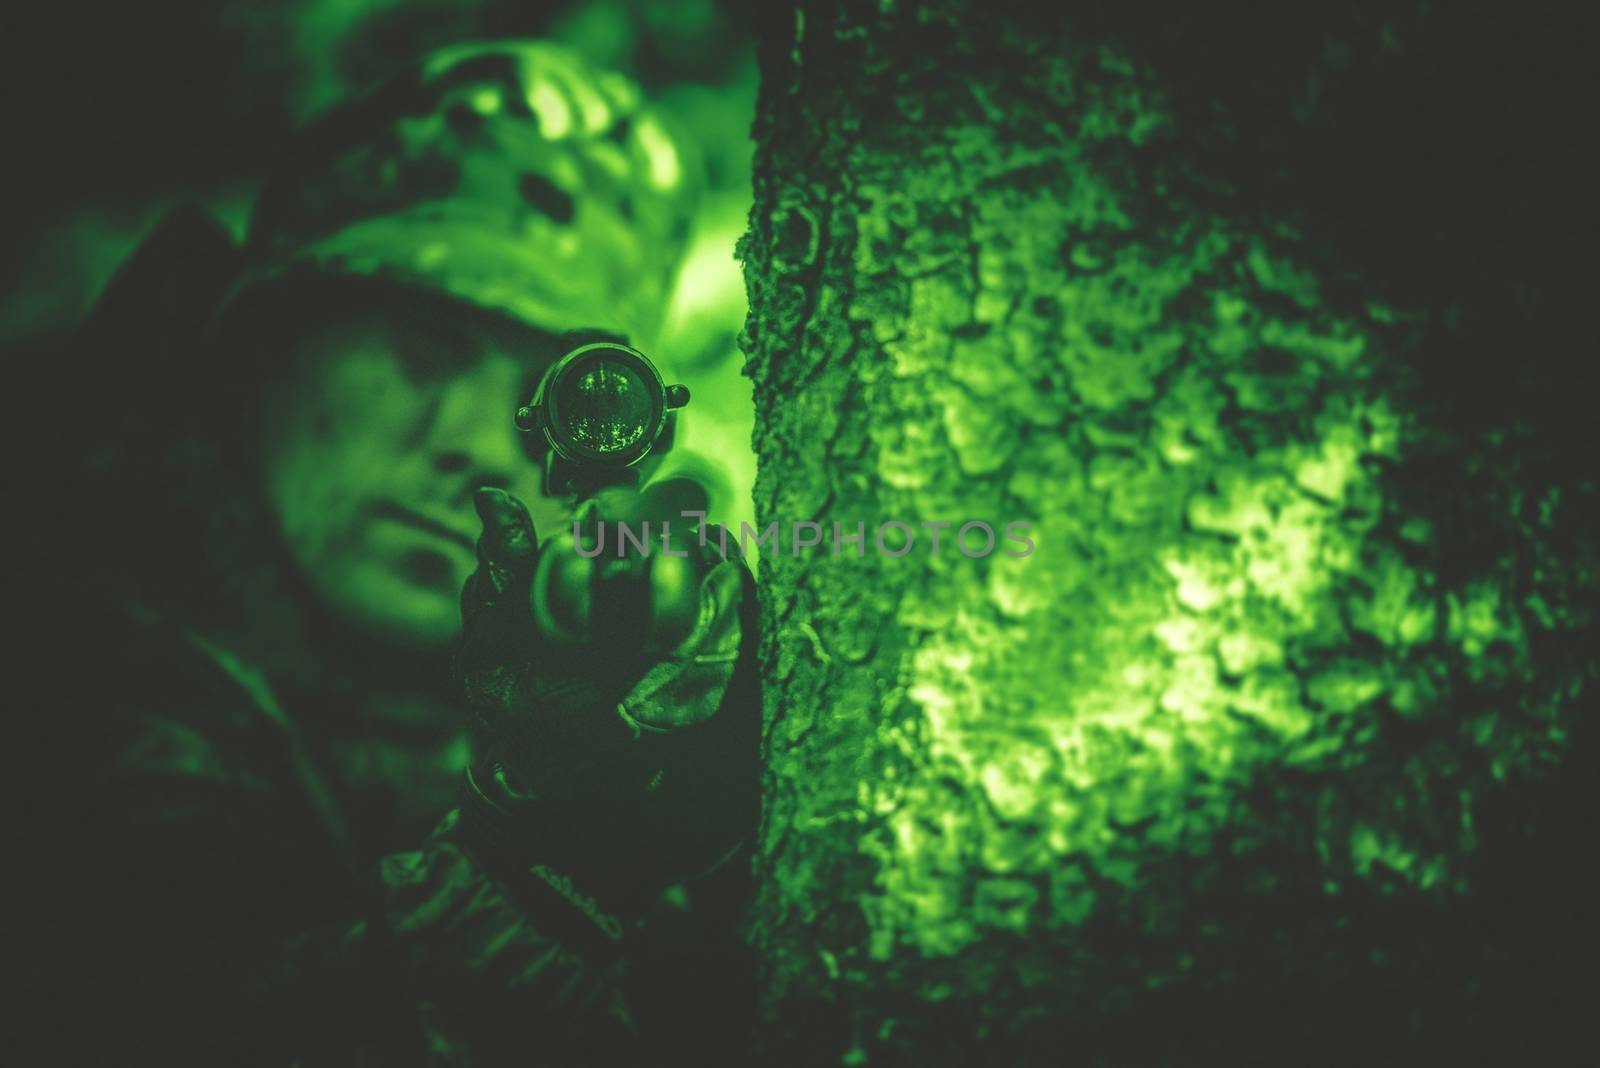 Poacher in Night Vision by welcomia